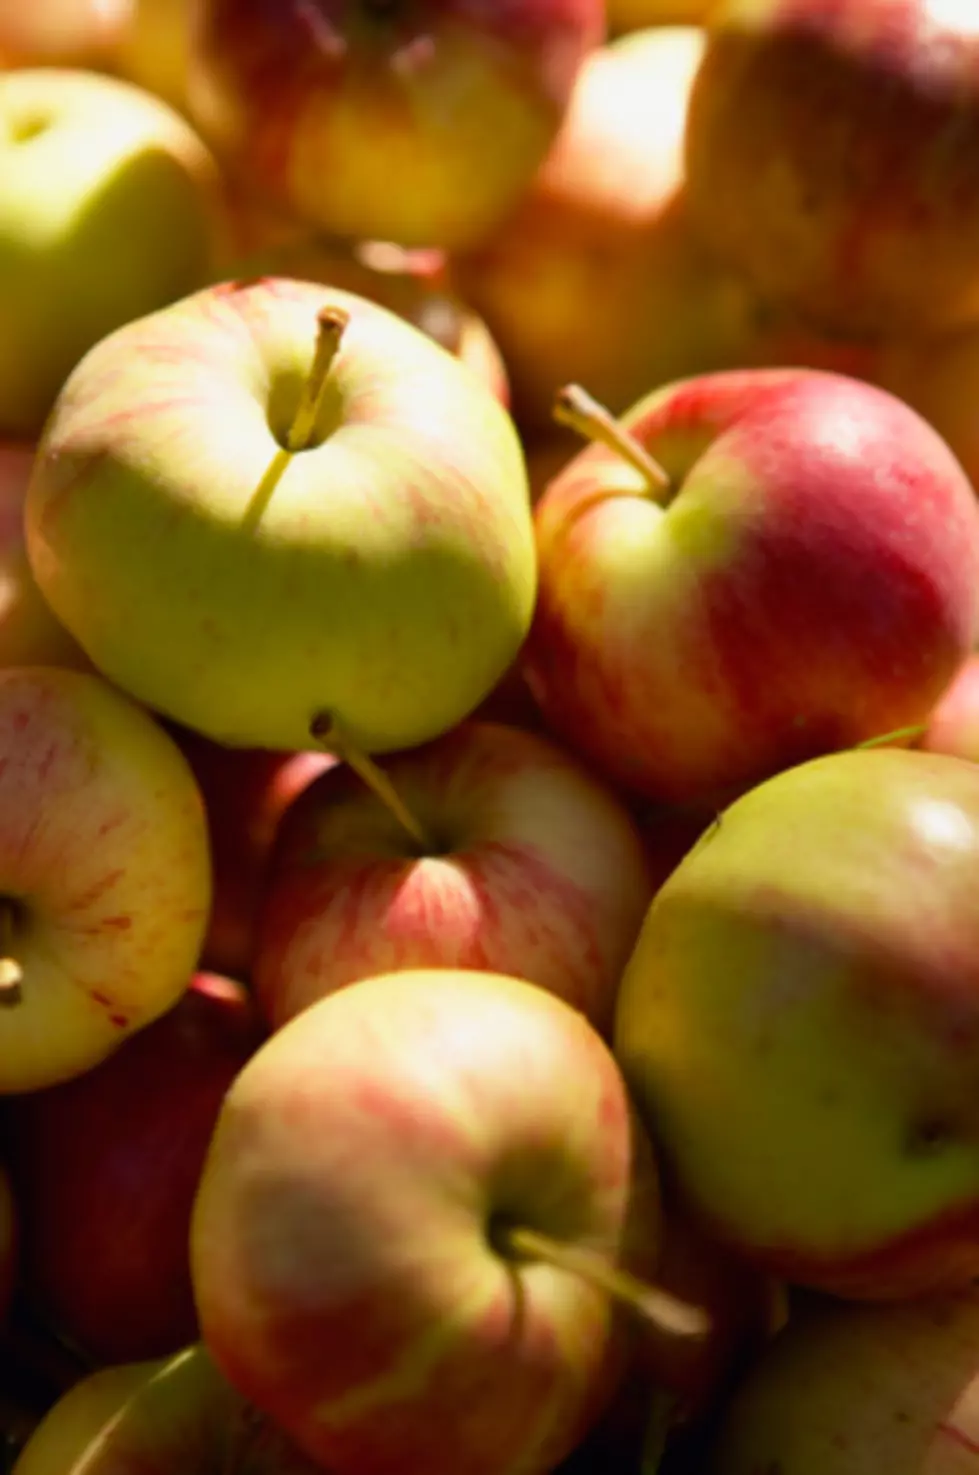 Where Is The Best Apple Picking in the Capital Region? [POLL]